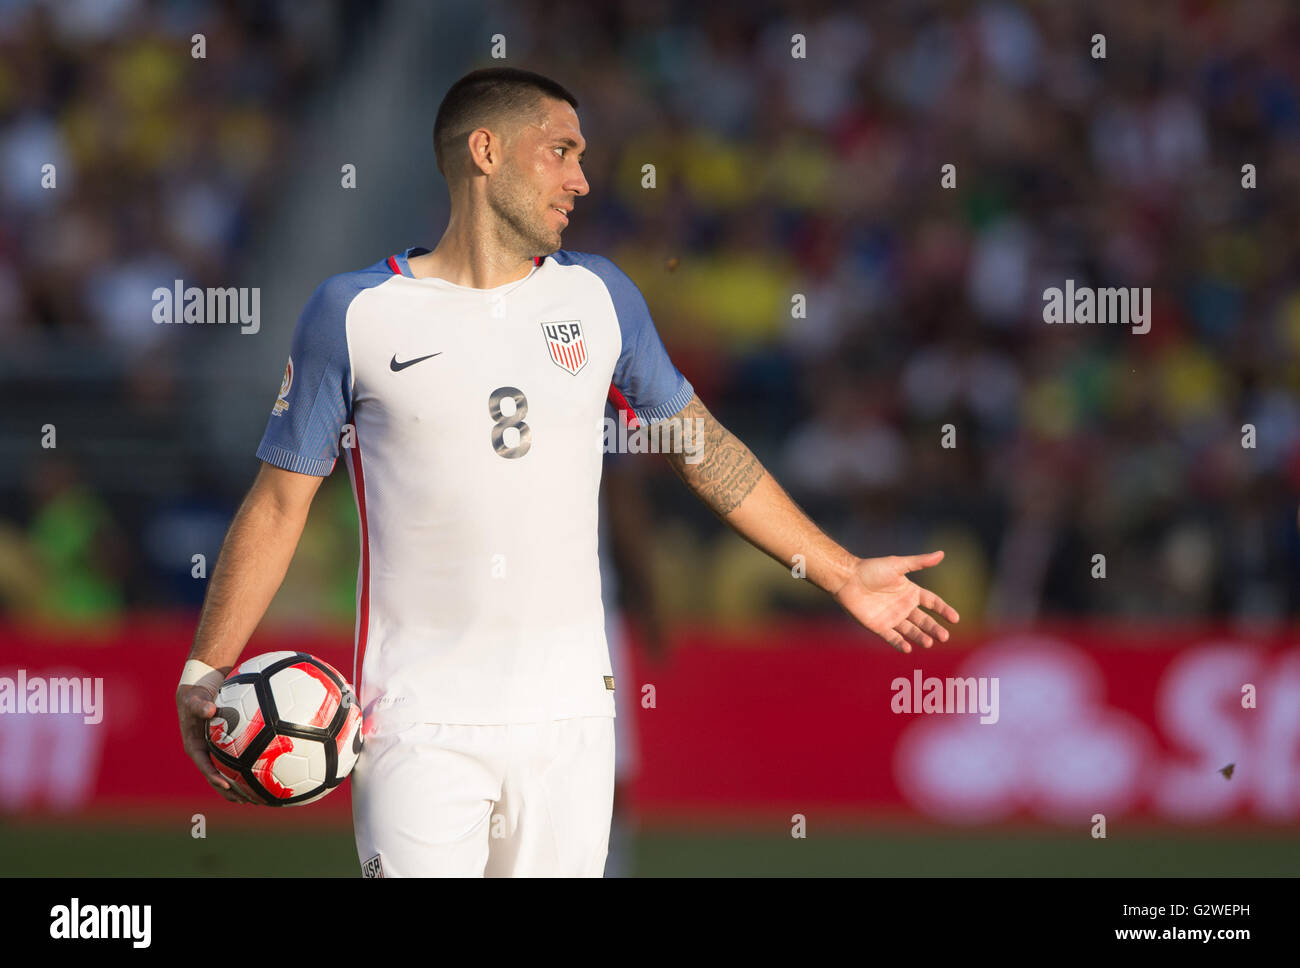 Santa Clara, USA. 3rd June, 2016. U.S. player Clint Dempsey reacts during the opening match of Copa America Centenario between Colombia and the United States at the Levi's Stadium in Santa Clara, California, the United States, June 3, 2016. Colombia won 2-0. Credit:  Yang Lei/Xinhua/Alamy Live News Stock Photo